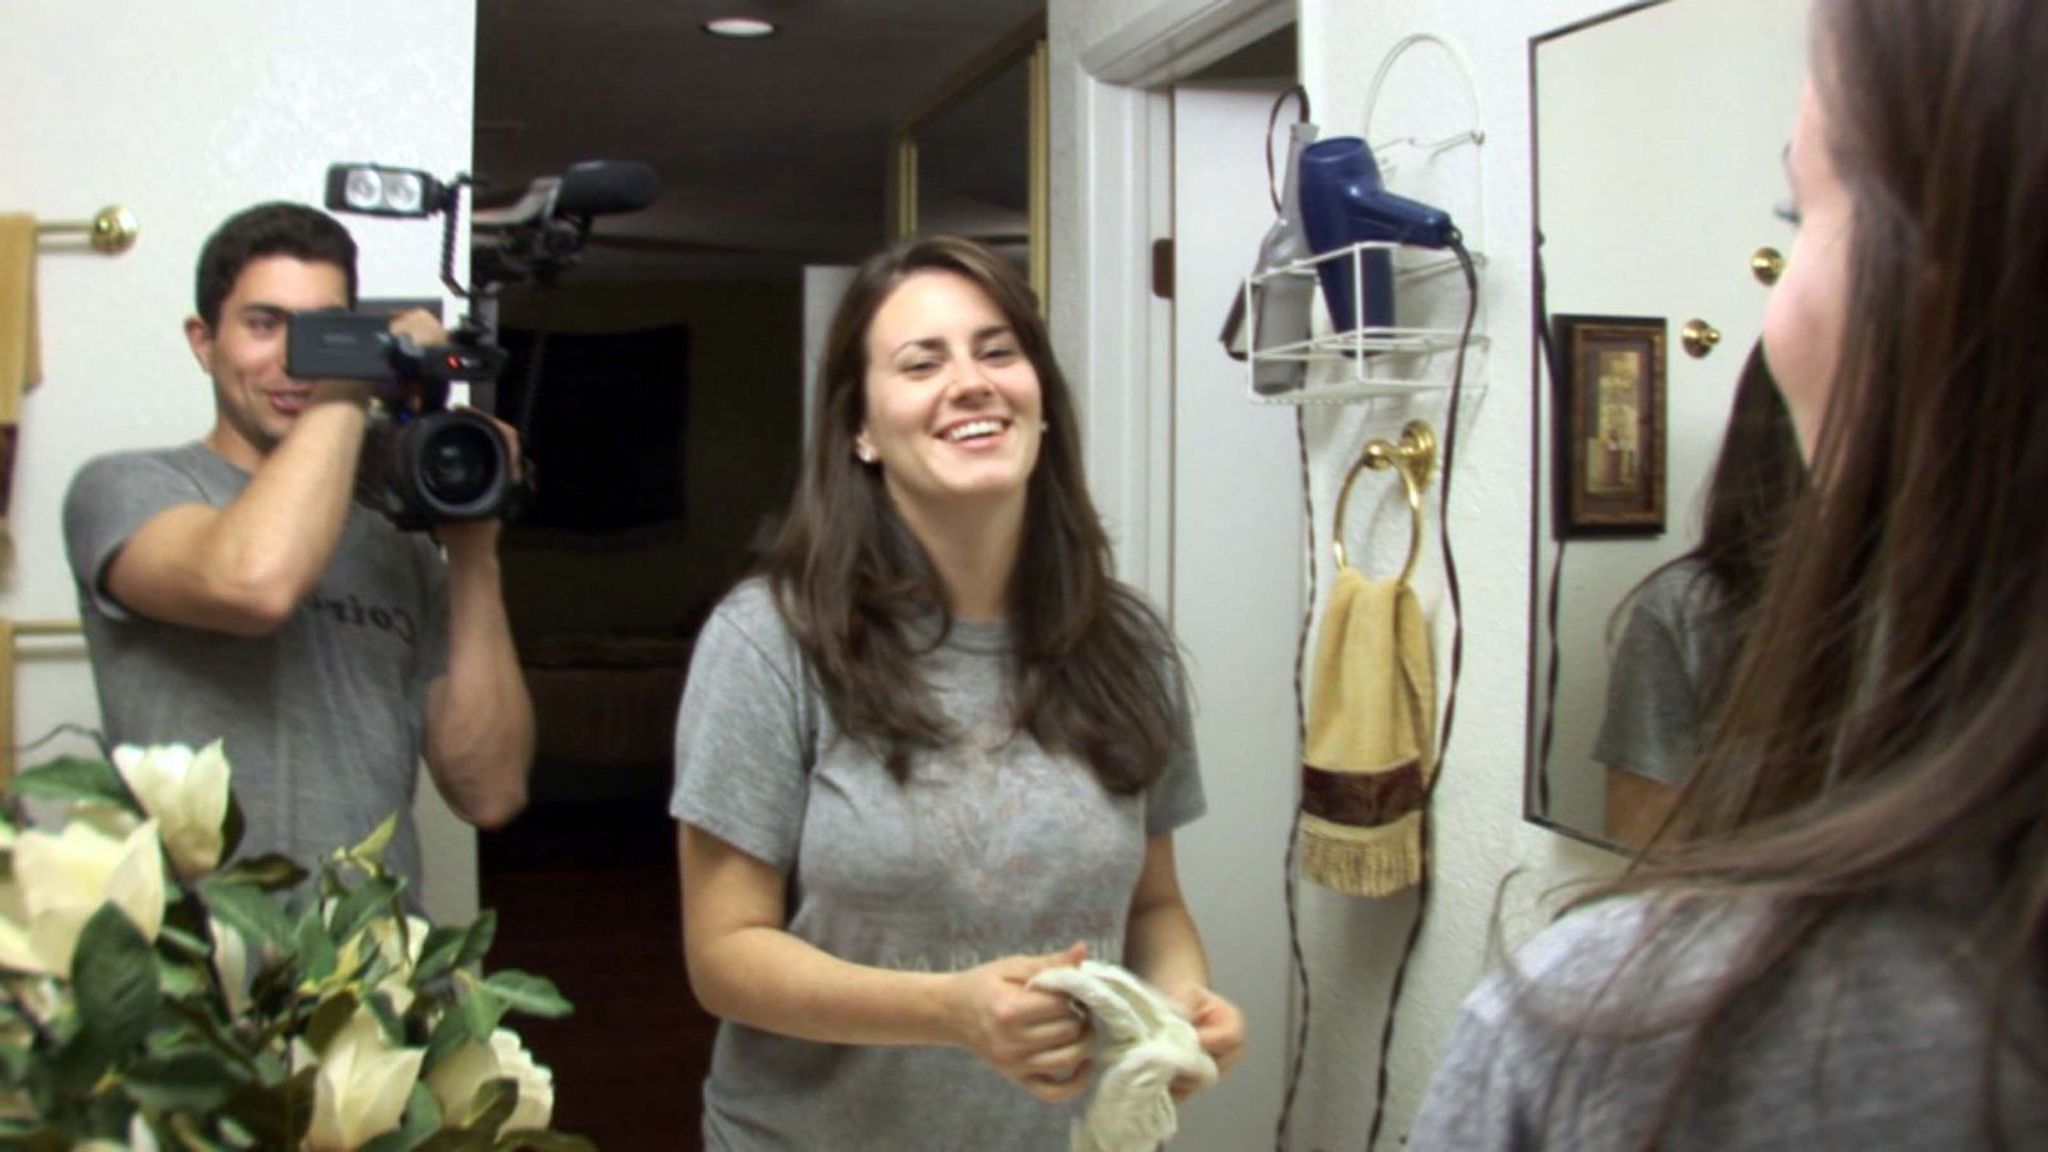 Micah Sloat and Katie Featherston smiling in a still from the Paranormal Activity film